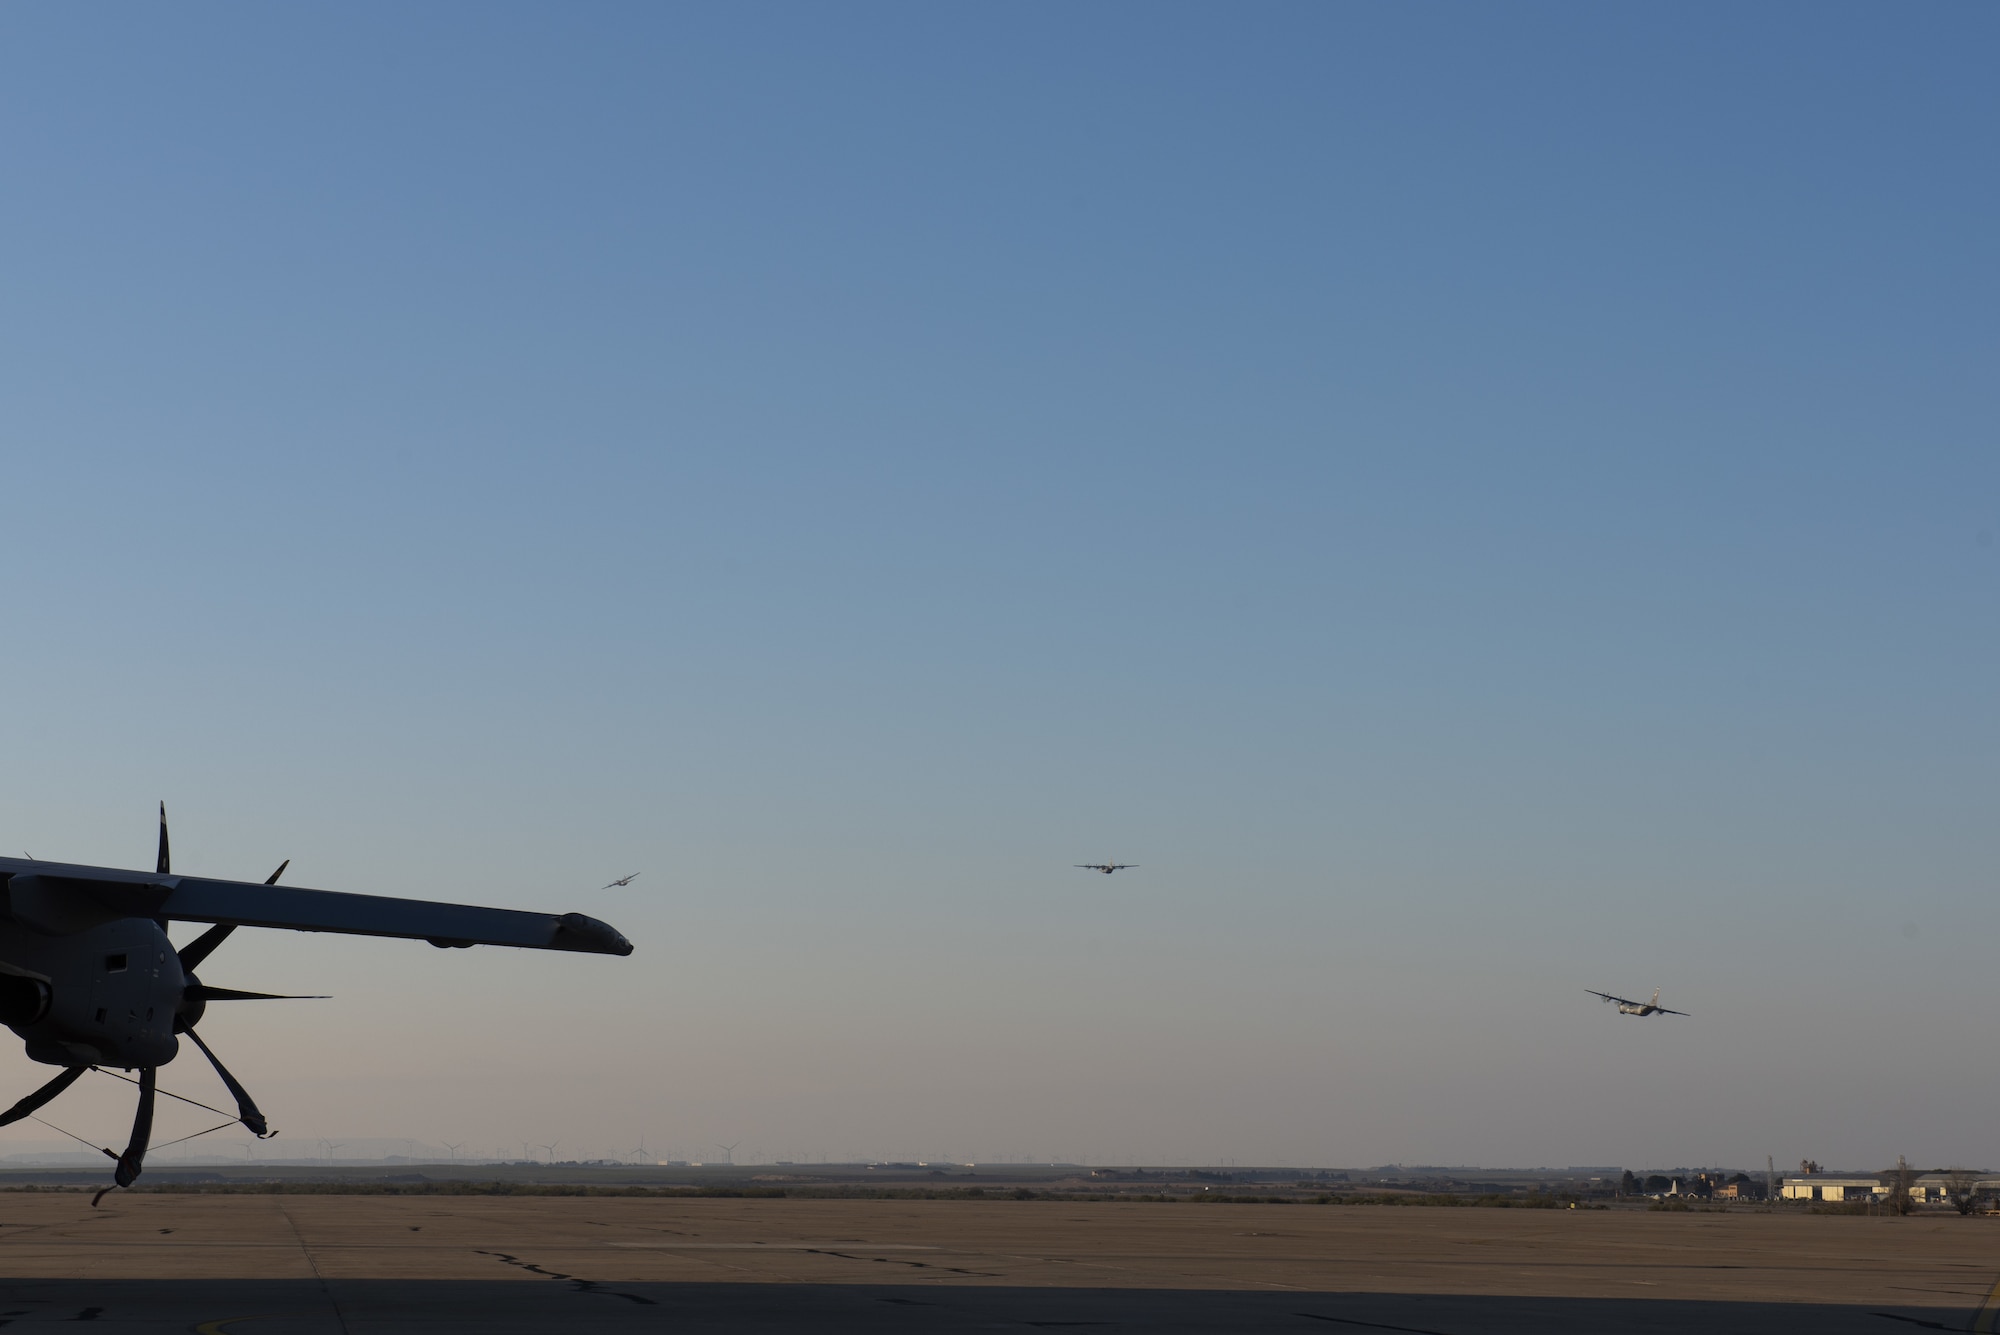 Three aircraft are in the blue sky